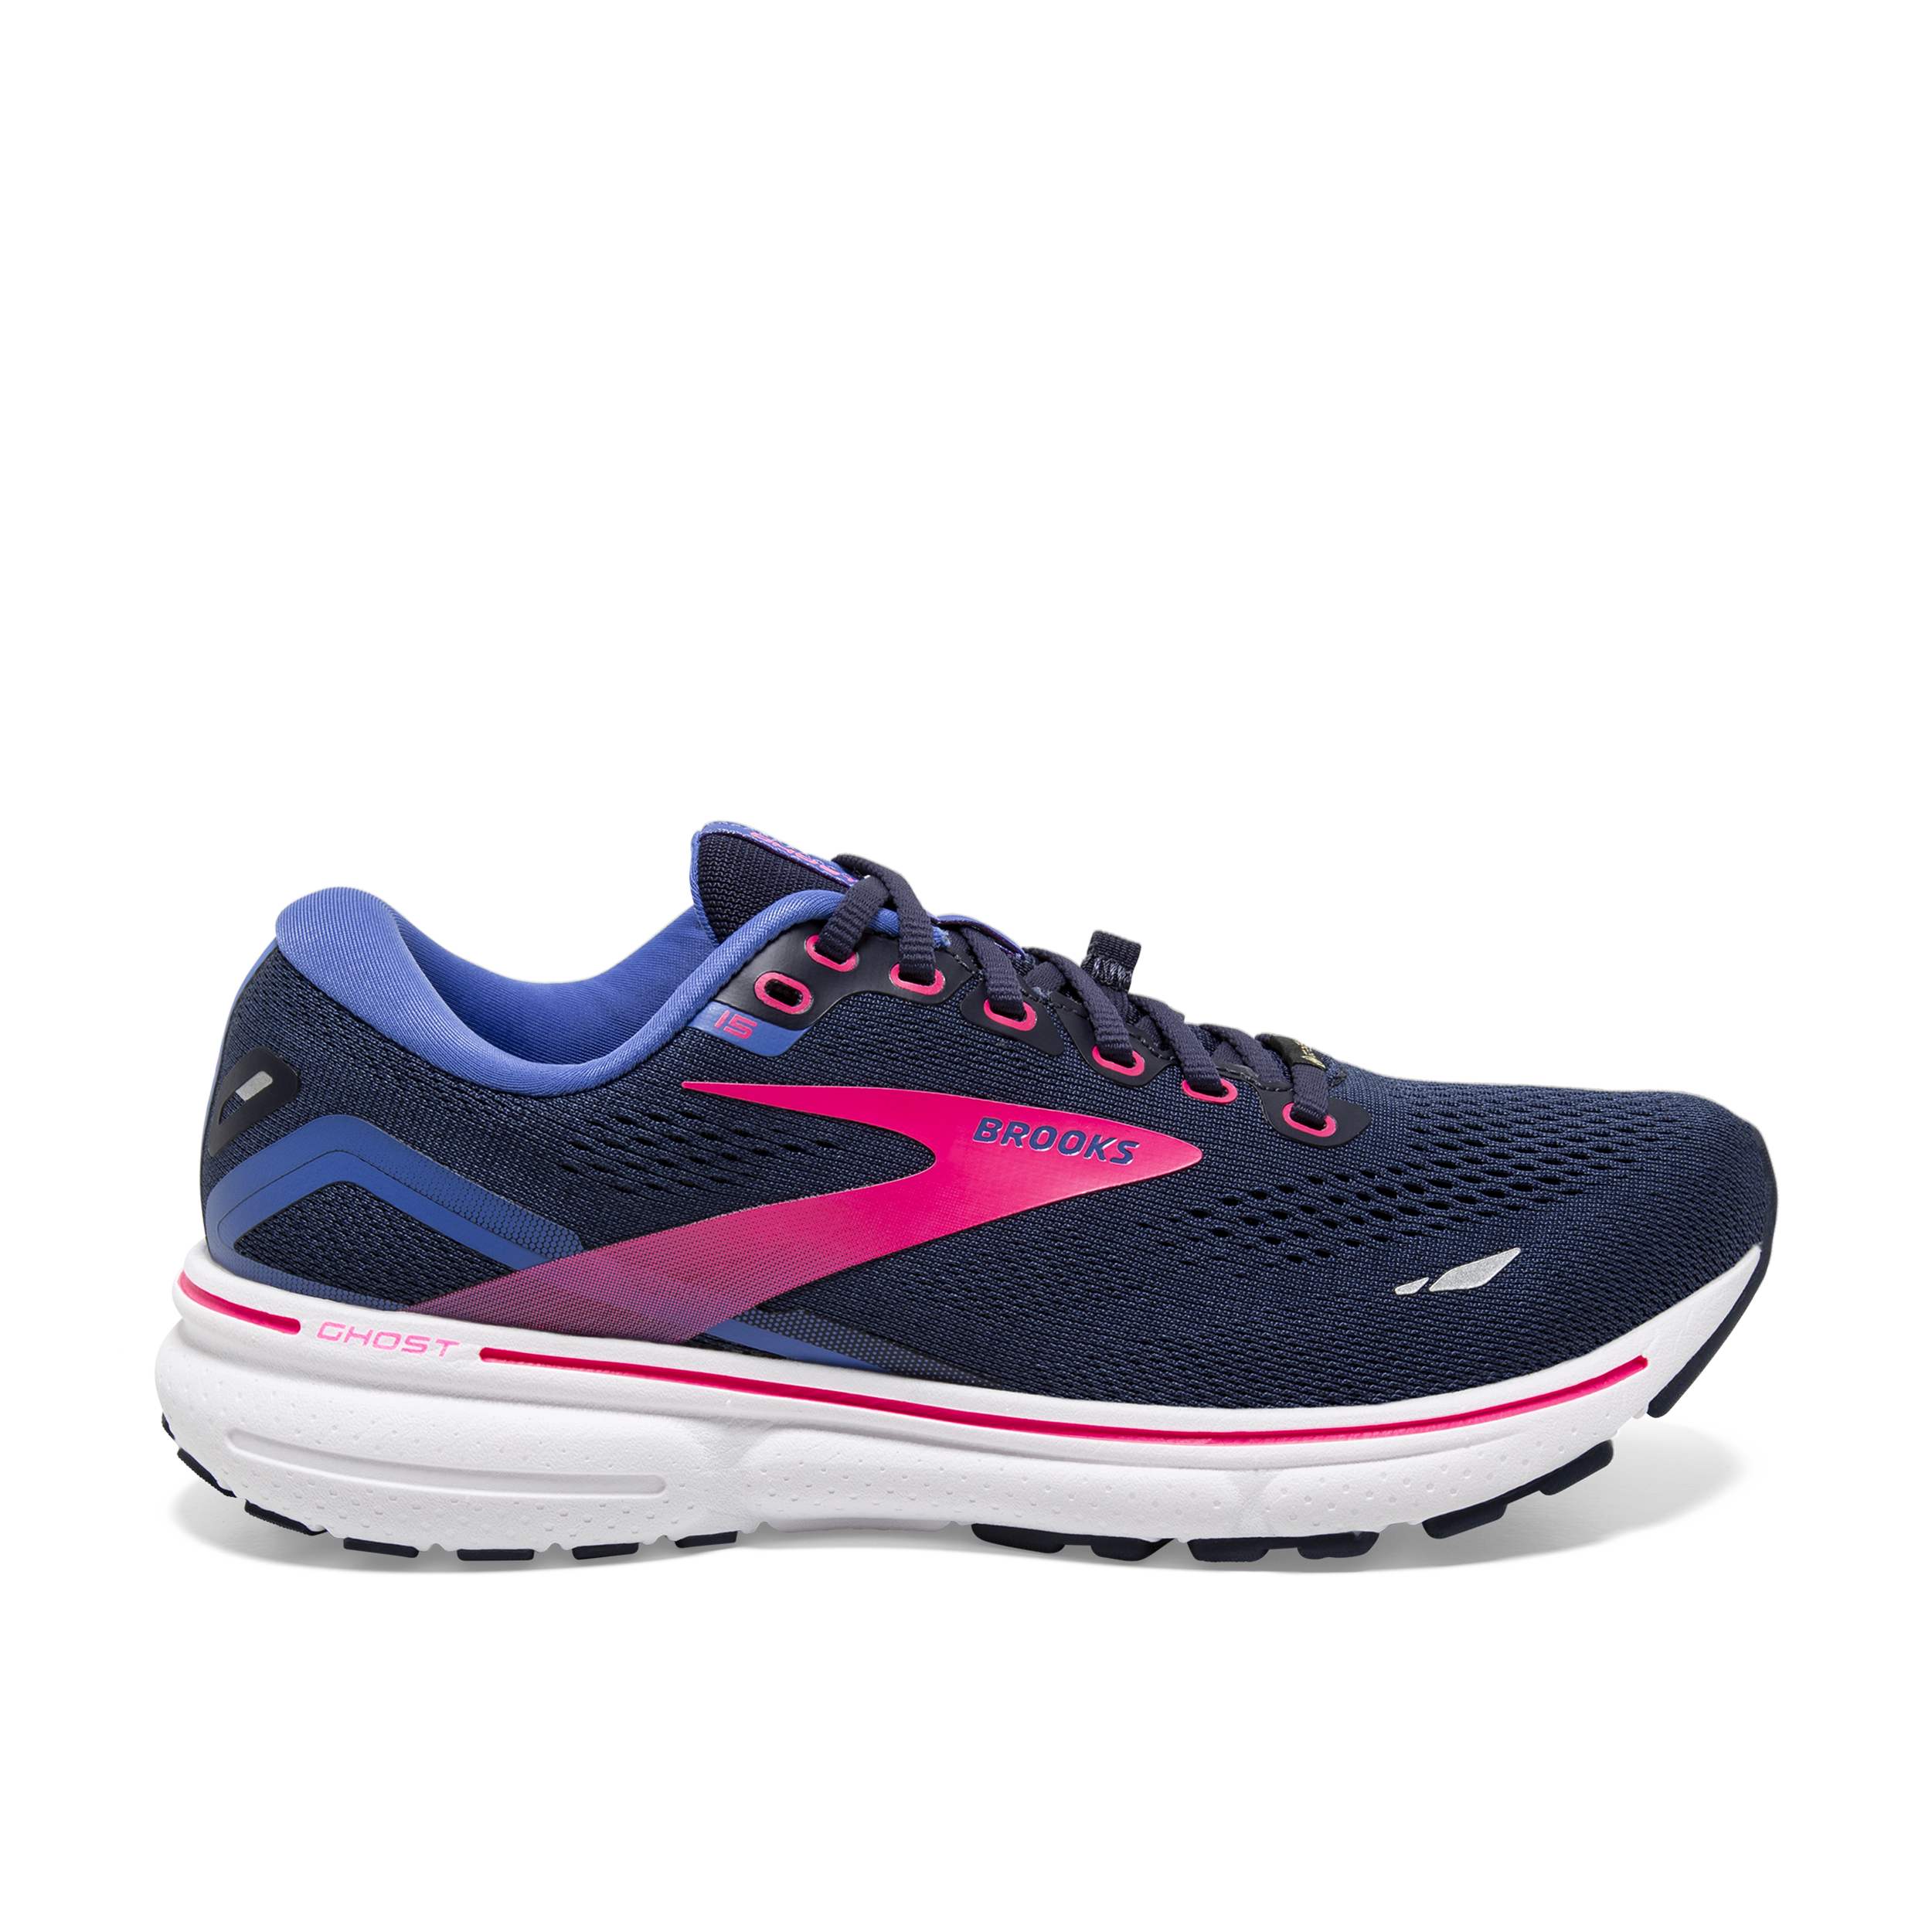 Women's Ghost 15 GTX Running Shoes | Cushioned Running Shoes